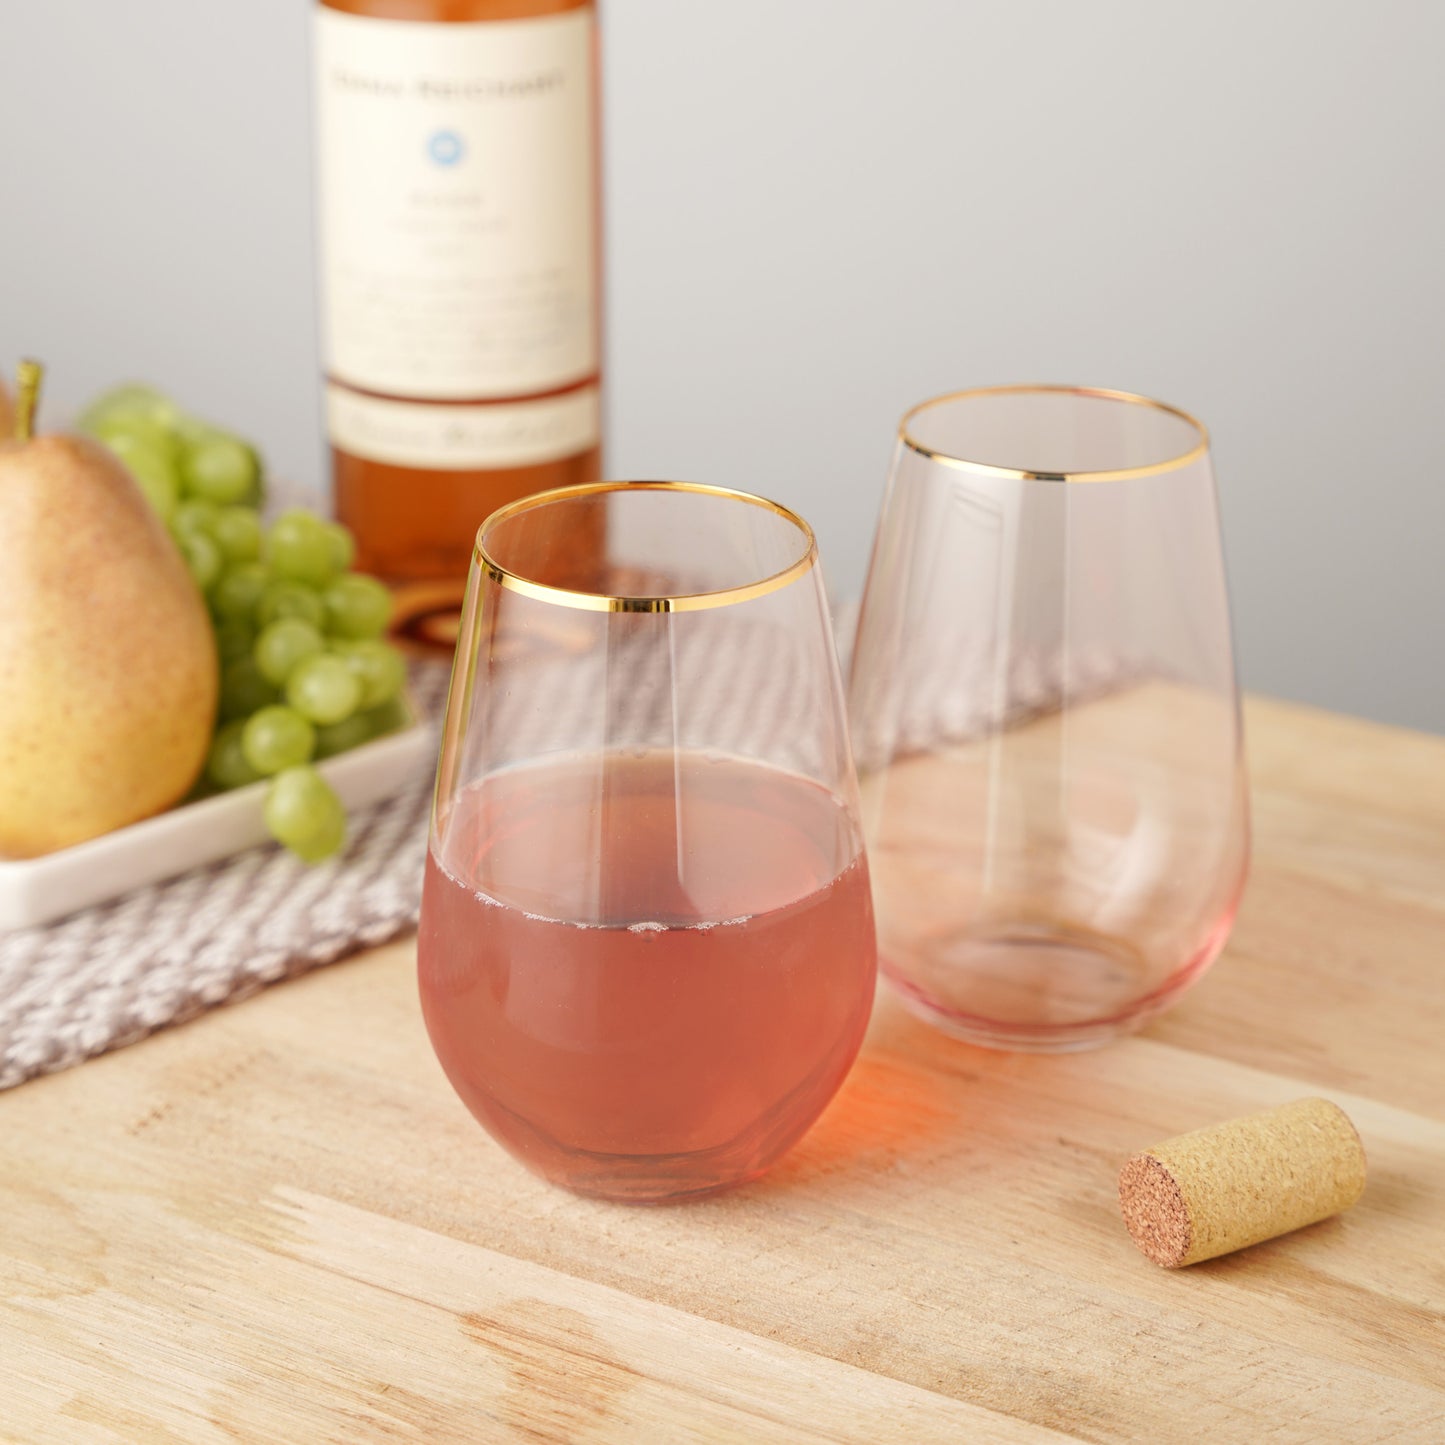 Rose 18 oz. Crystal Stemless Wine Glass Set of 4 by TwineÂ®